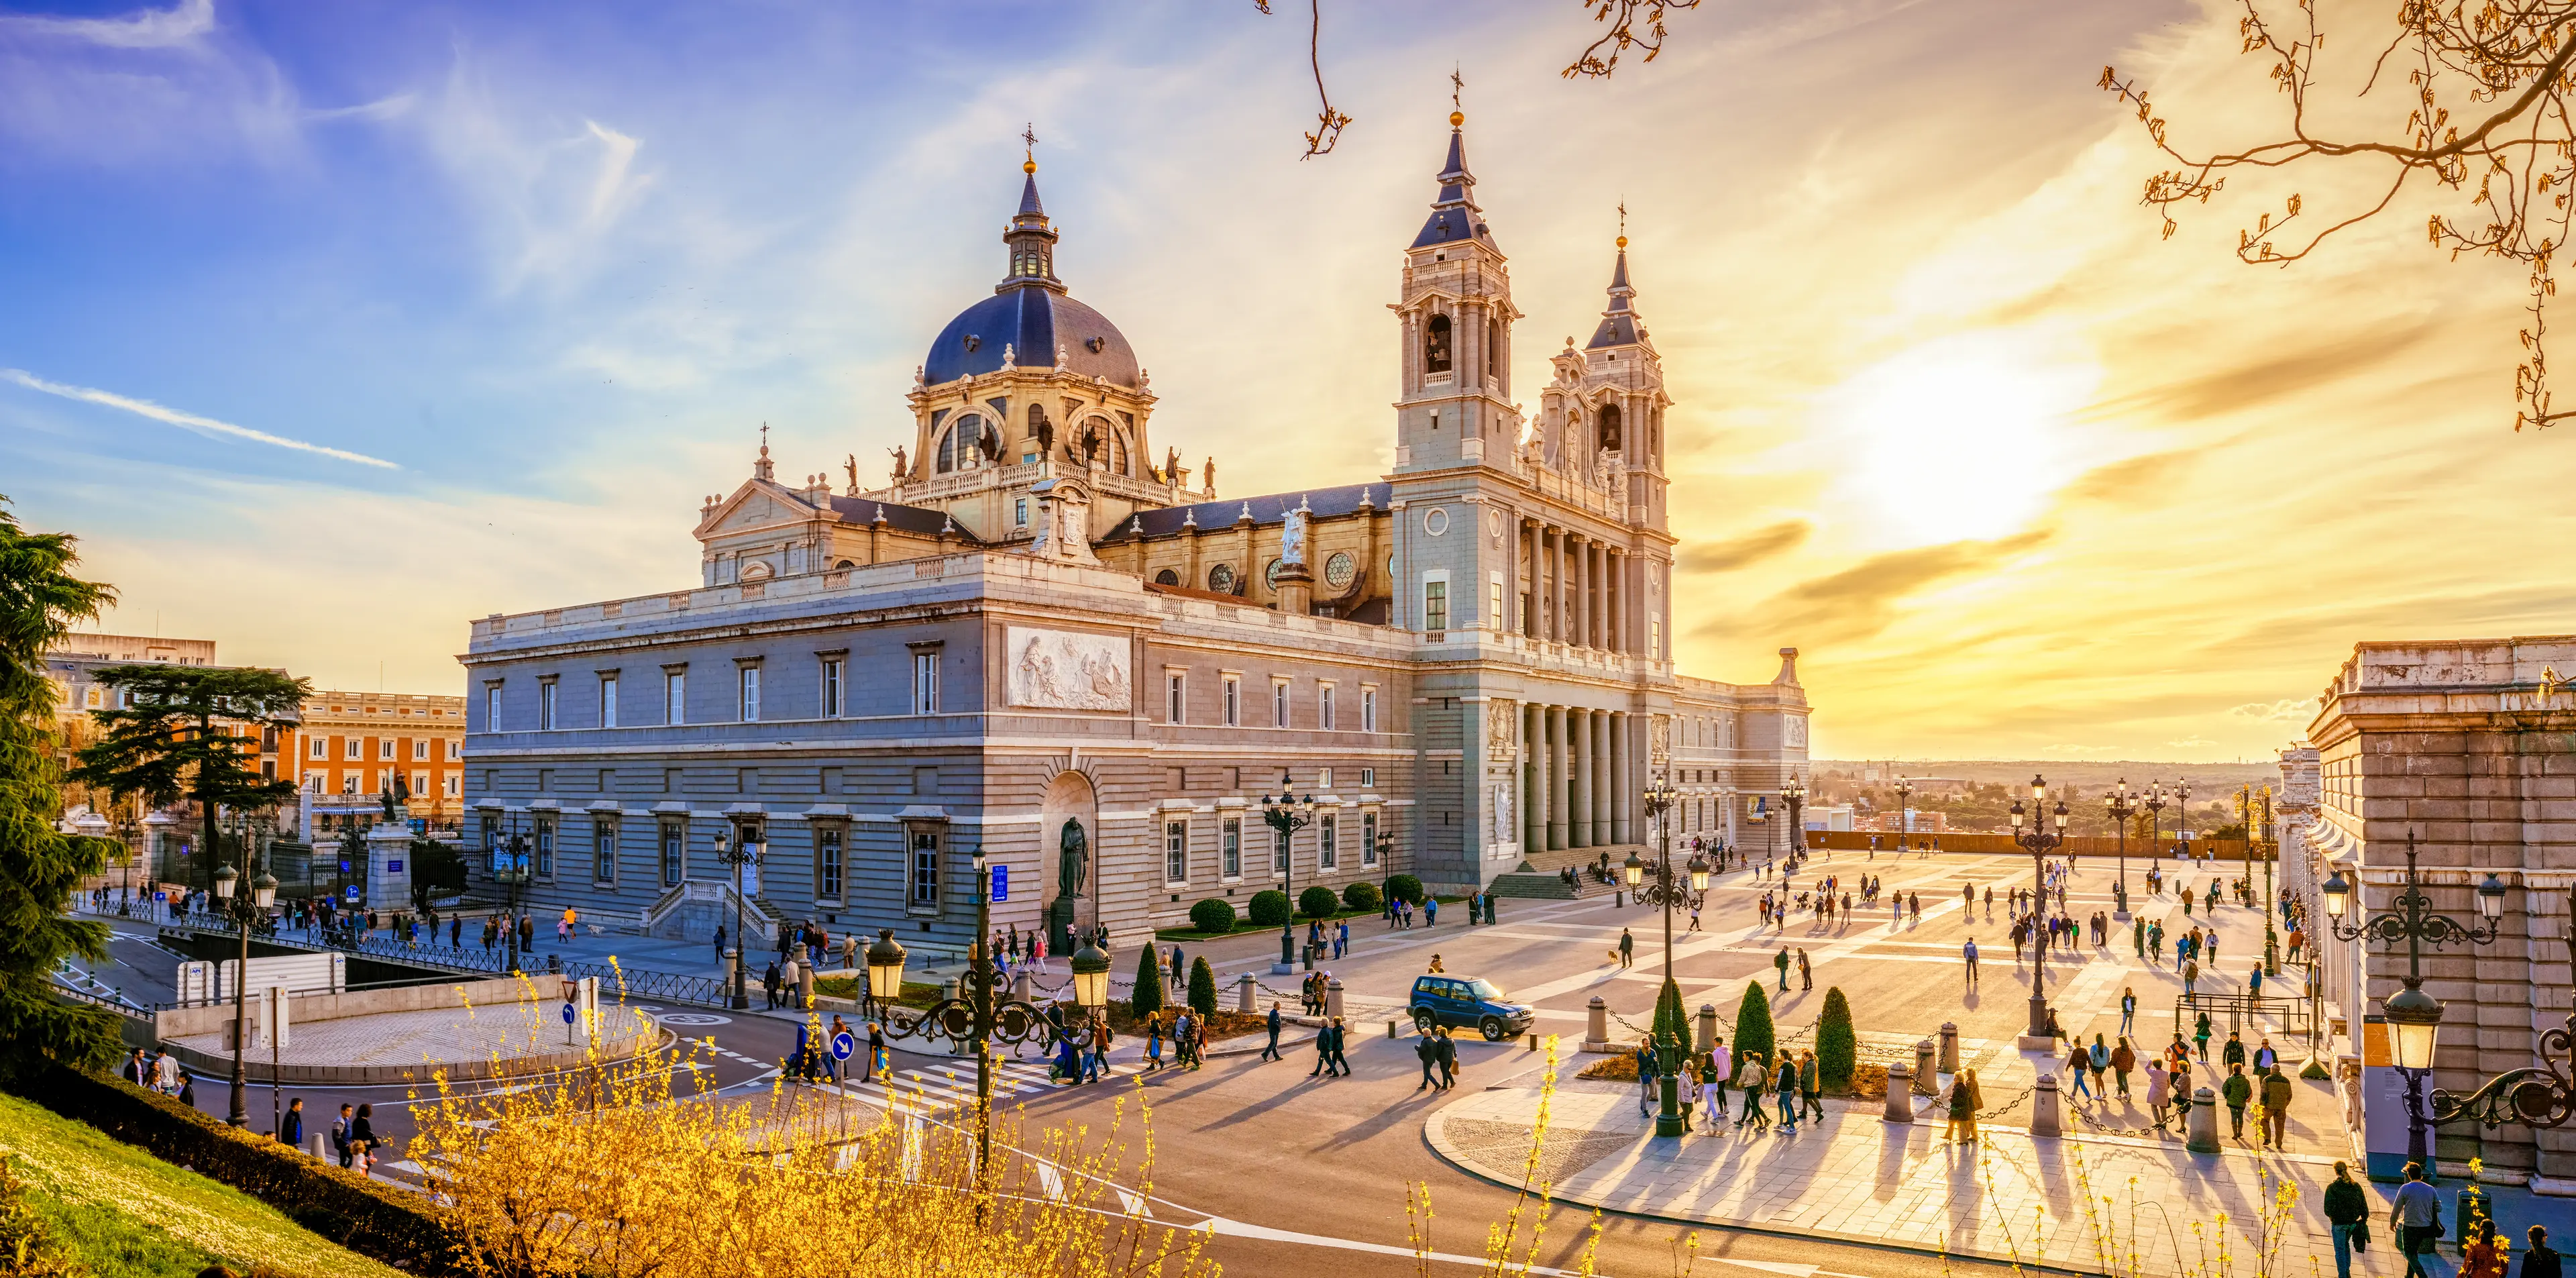 1-Day Madrid Adventure: Unexplored Spots, Nightlife & Shopping with Friends